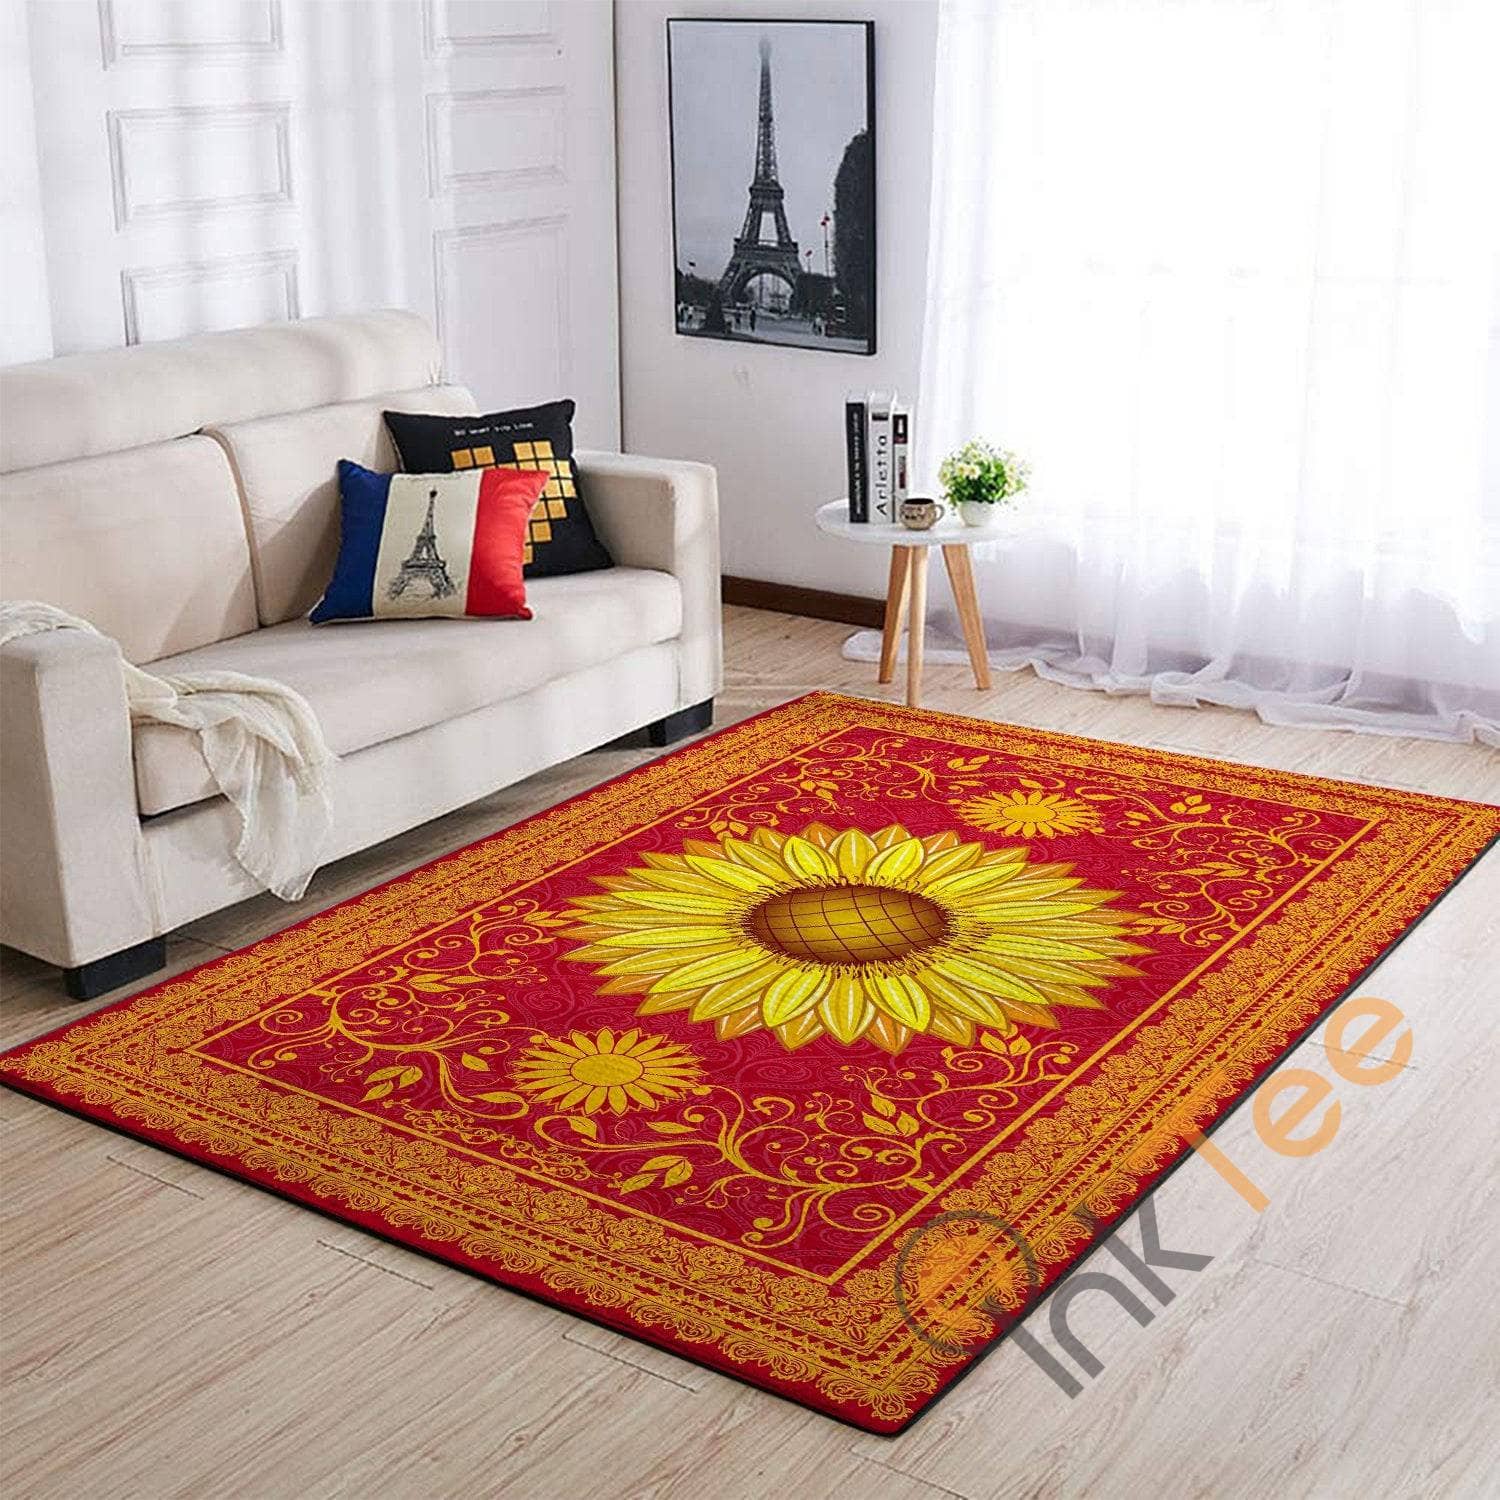 Hippie The Luxurious Sunflowers Pattern Soft Living Room Bedroom Carpet Highlight For Home Beautiful Rug